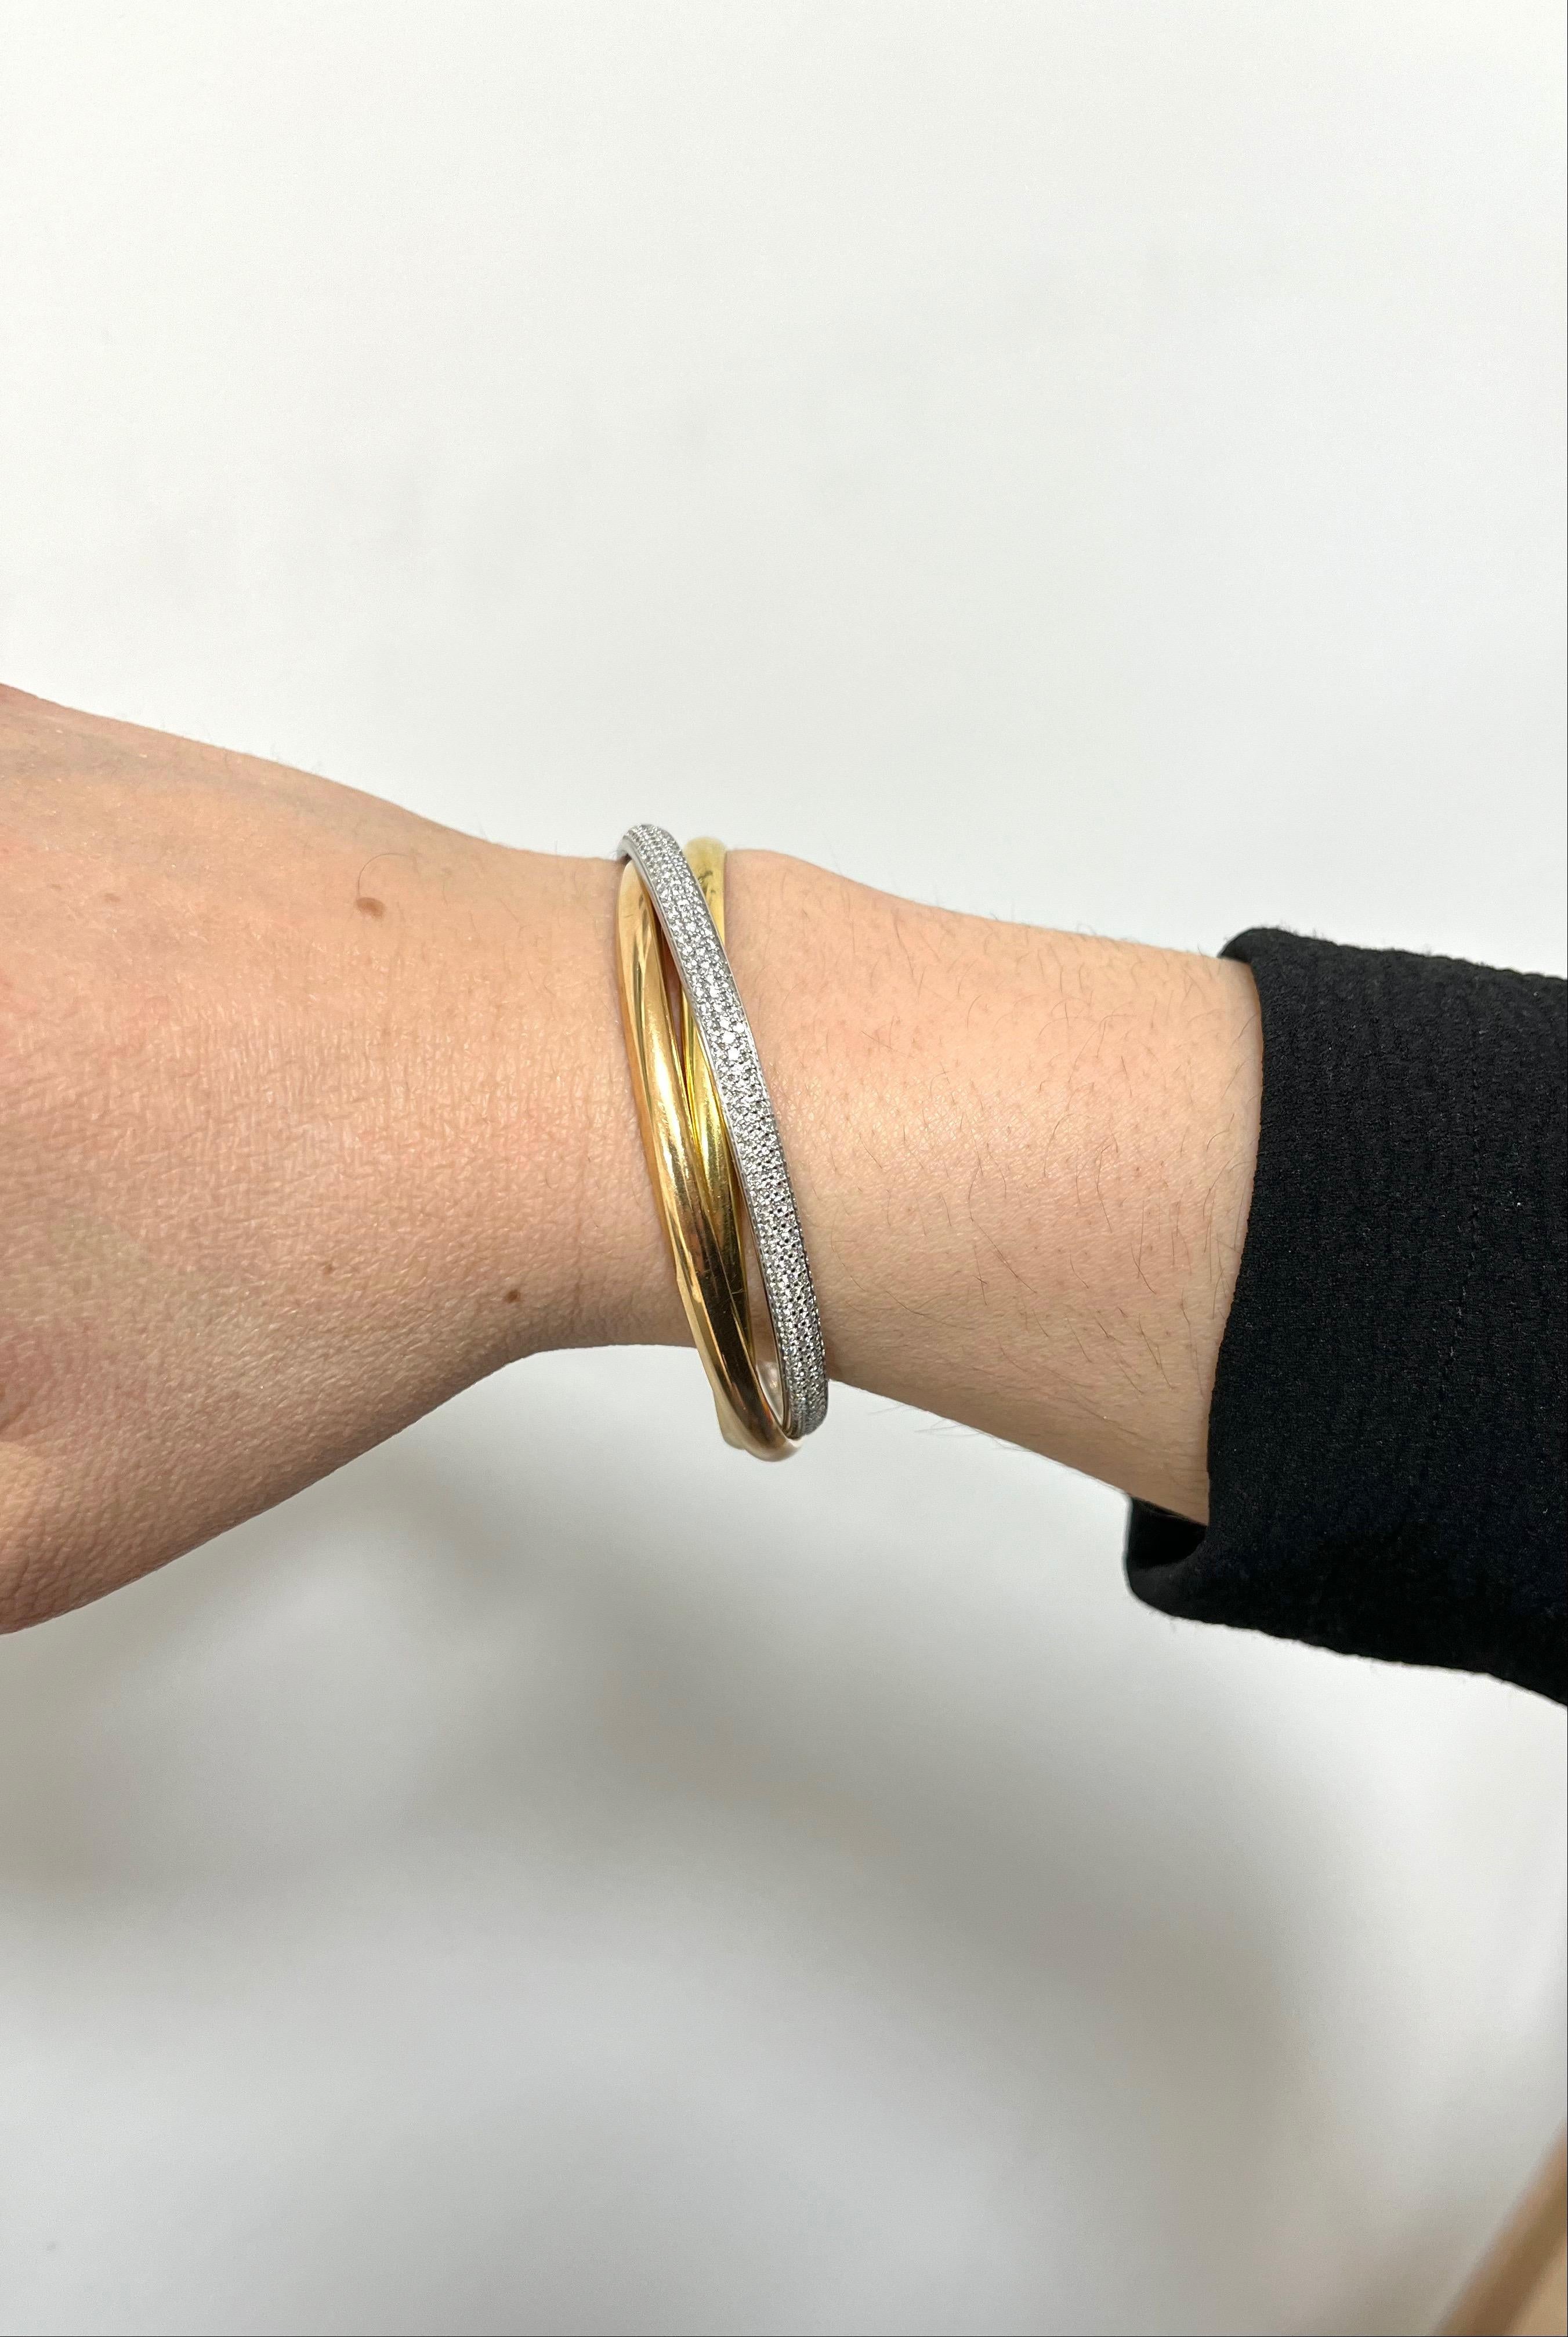 18 kt. three tone gold bangles with diamonds hand-made in France.
This iconic design is signed and numbered by Cartier.
This 18k three tone gold trinity bangle features one 18k white gold bangle embellished with 4.50 carat ca. of round-cut